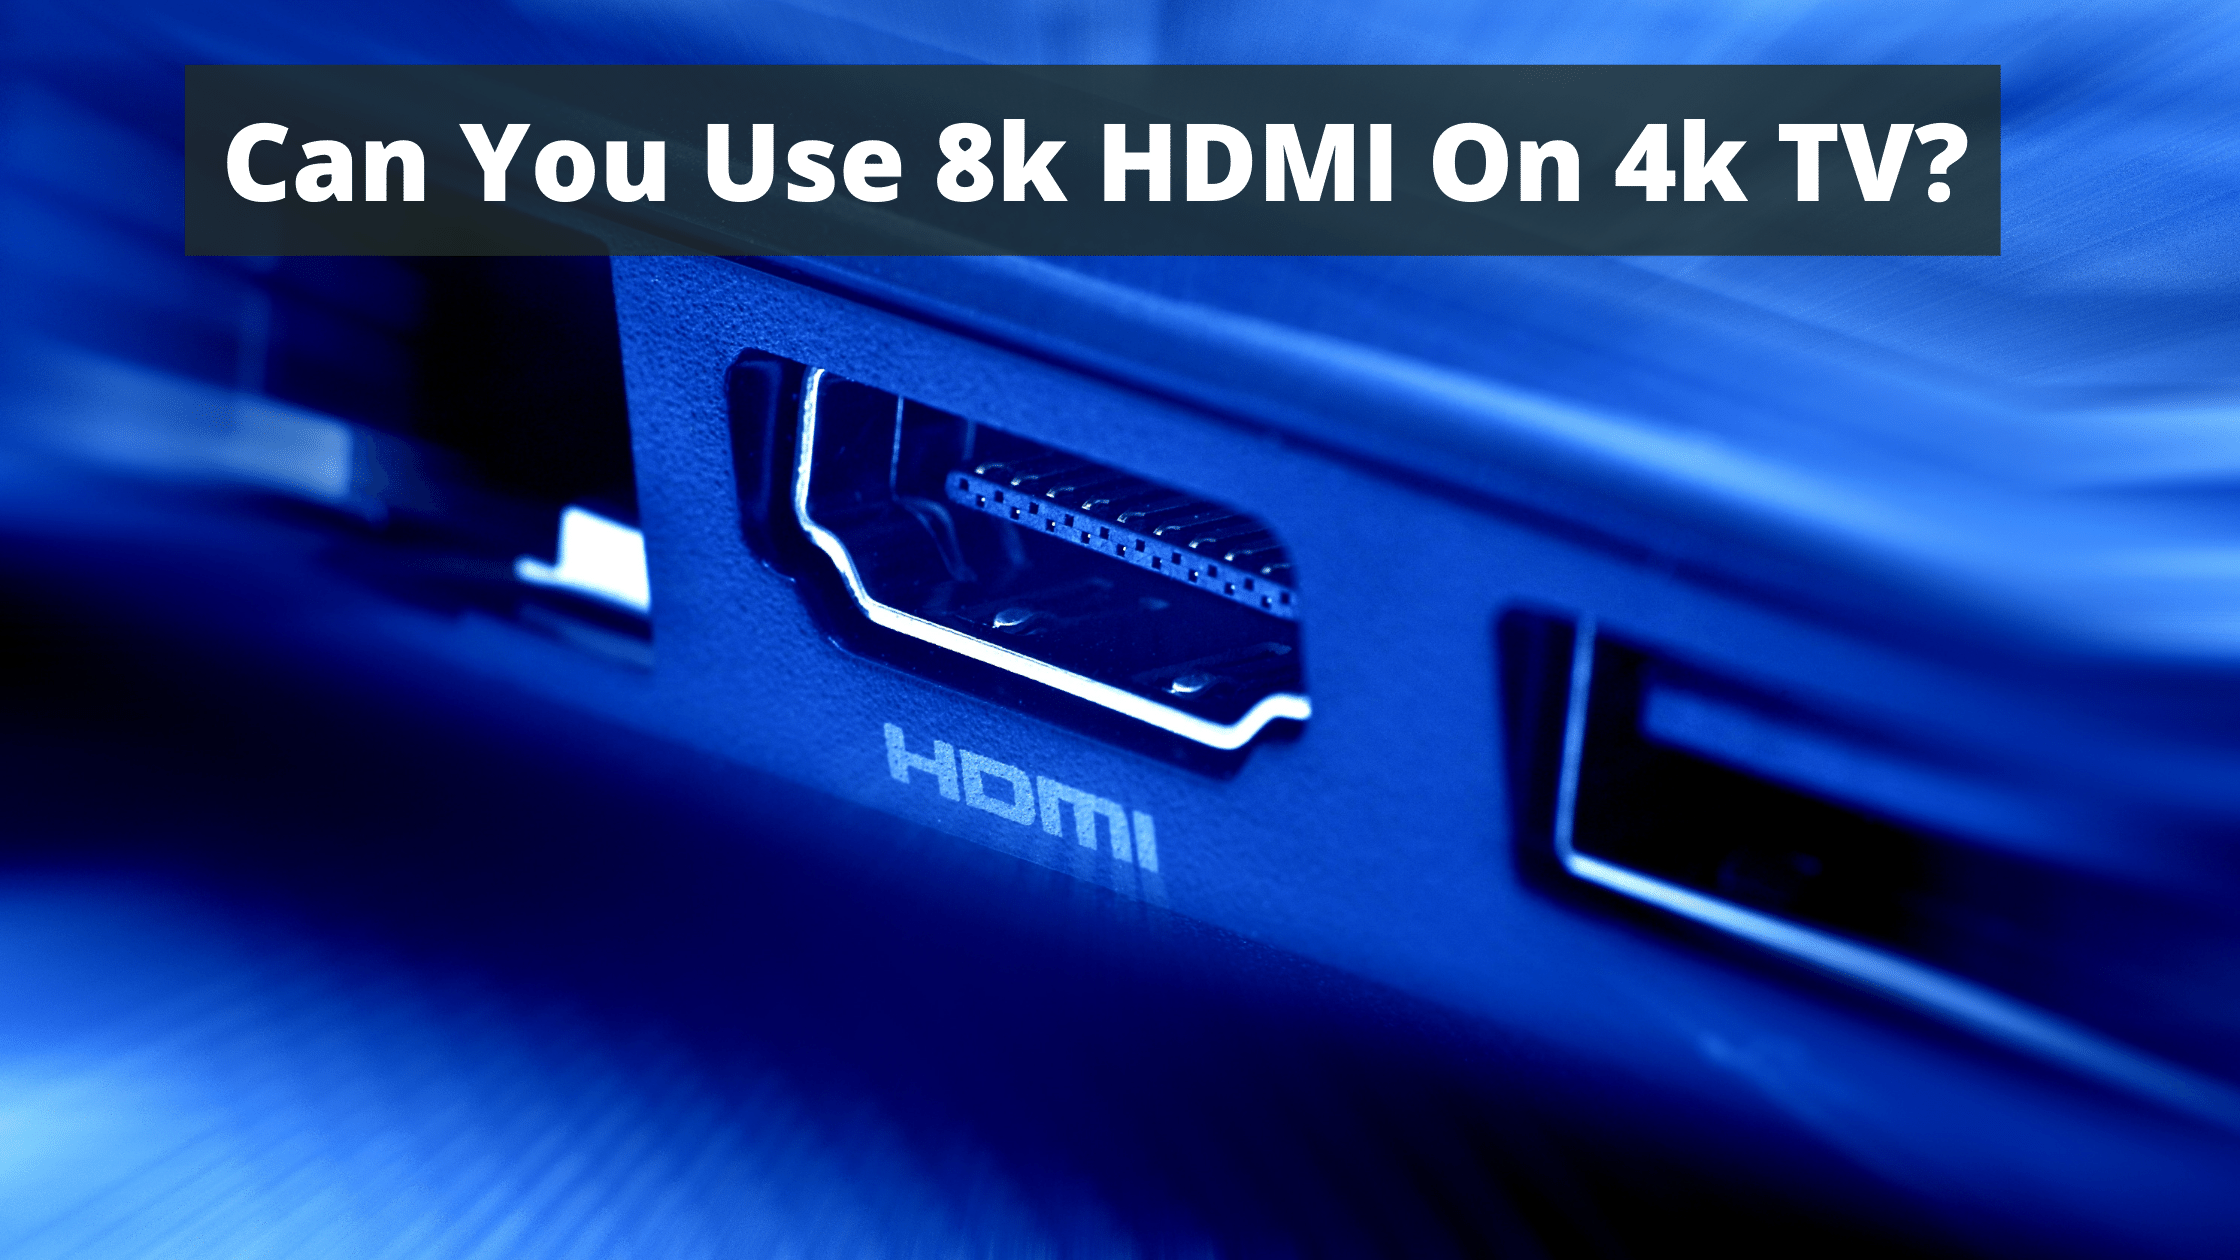 Can You Use 8k HDMI On 4k TV?